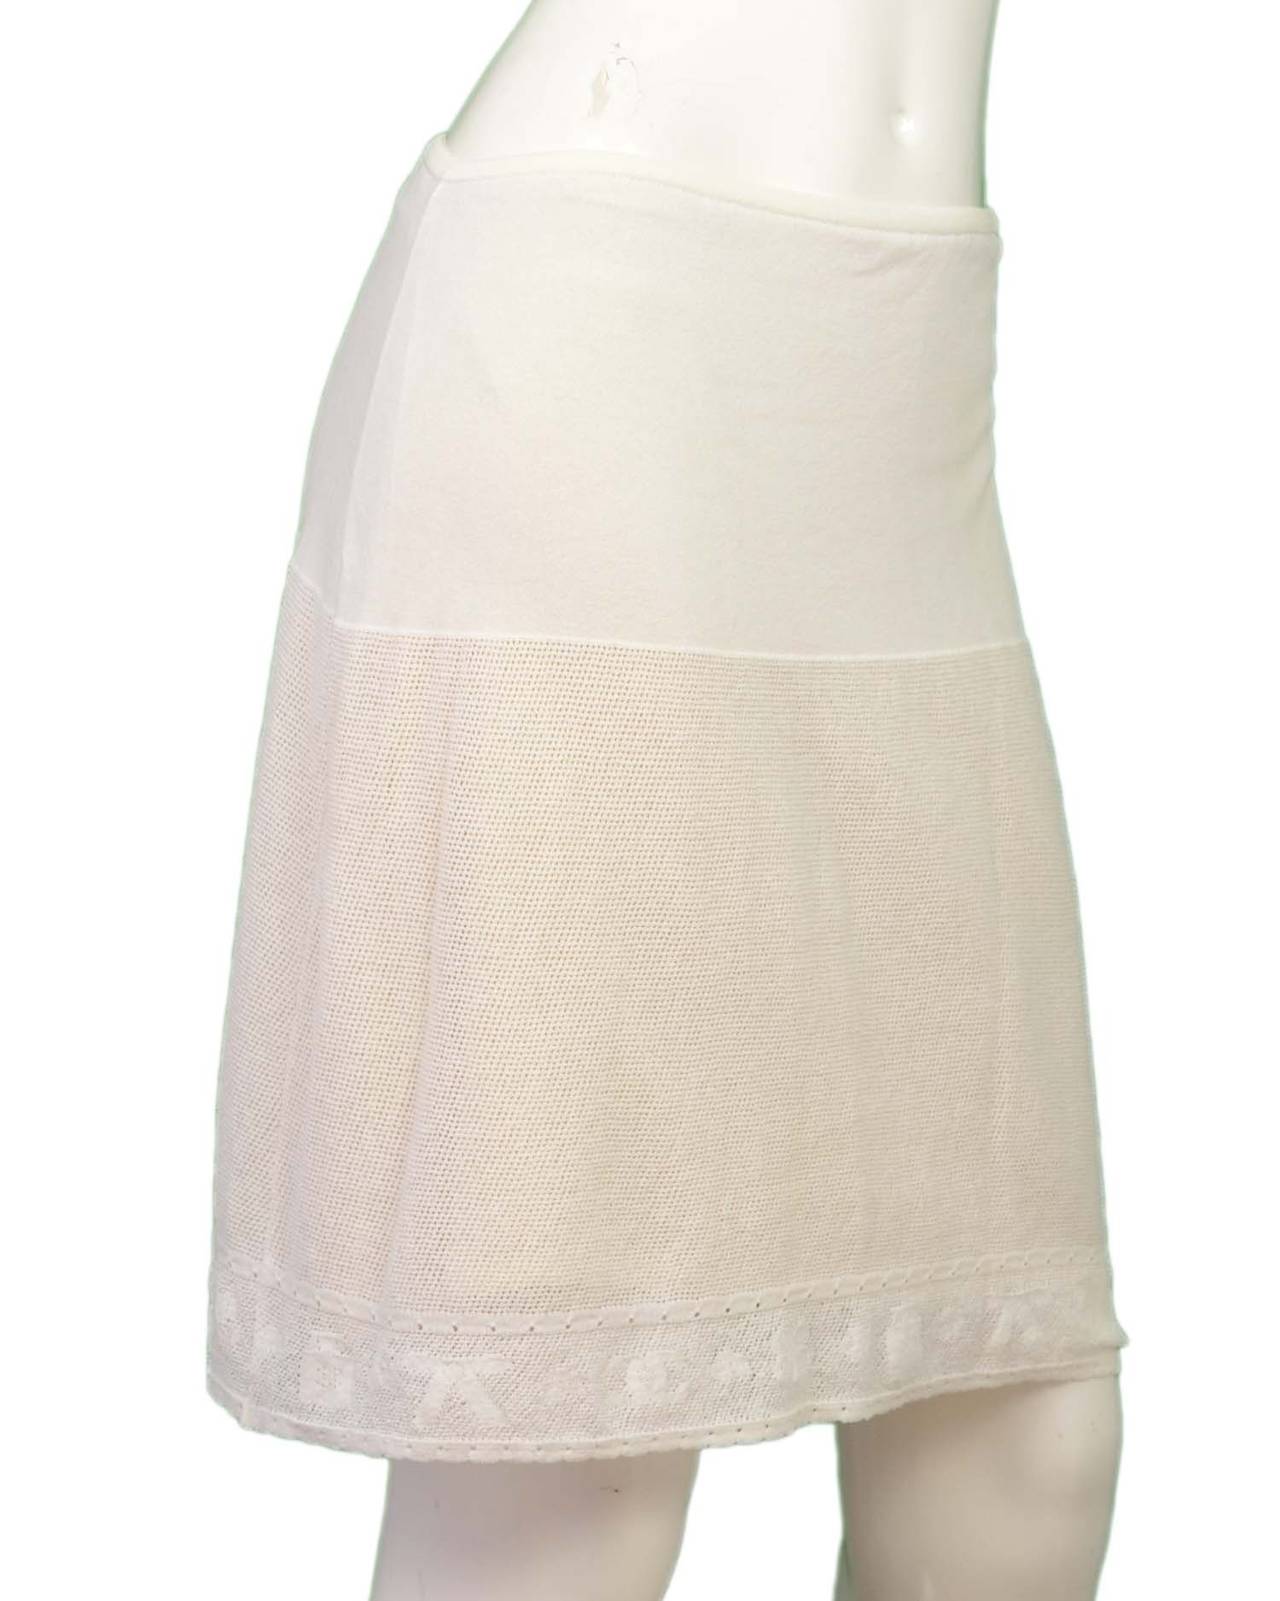 Chanel '03 White Perforated Stretch SkirtFeatures CC and bow design at hemline

    Made in: France
    Year of Production: 2003
    Color: White
    Composition: 80% cotton, 20% polyester
    Lining: Beige, 94% silk, 6% spandex
   